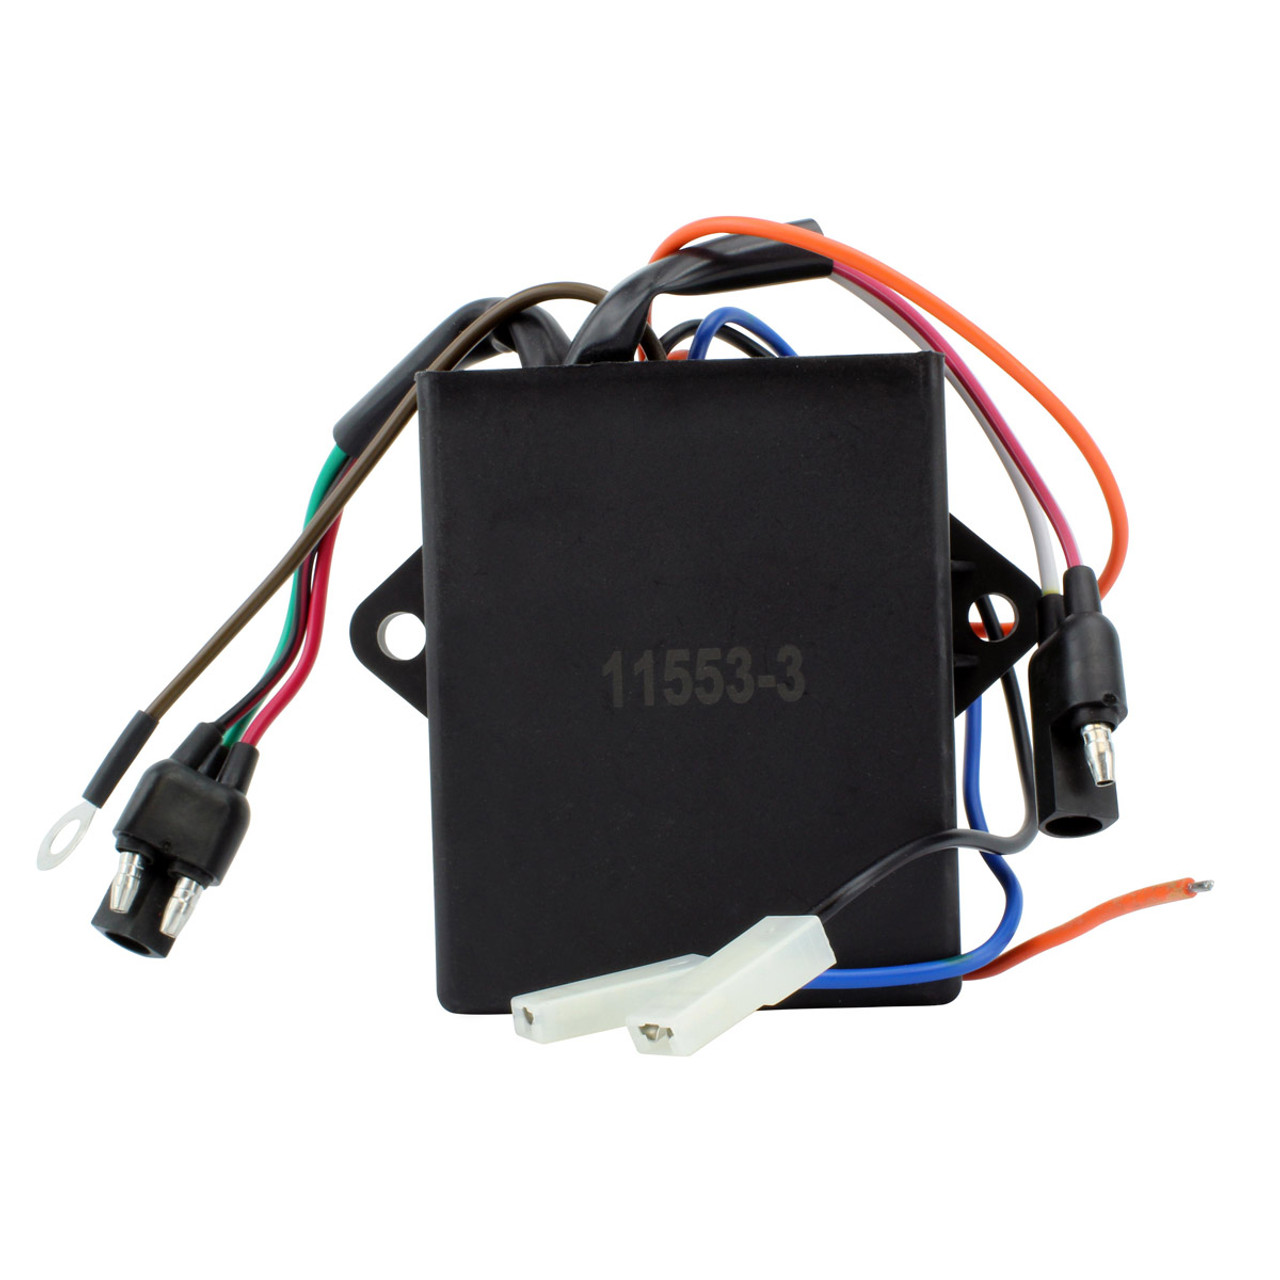 RMSTATOR New Aftermarket Polaris AC to DC Ignition Conversion Kit for Stator & CDI, RM40001